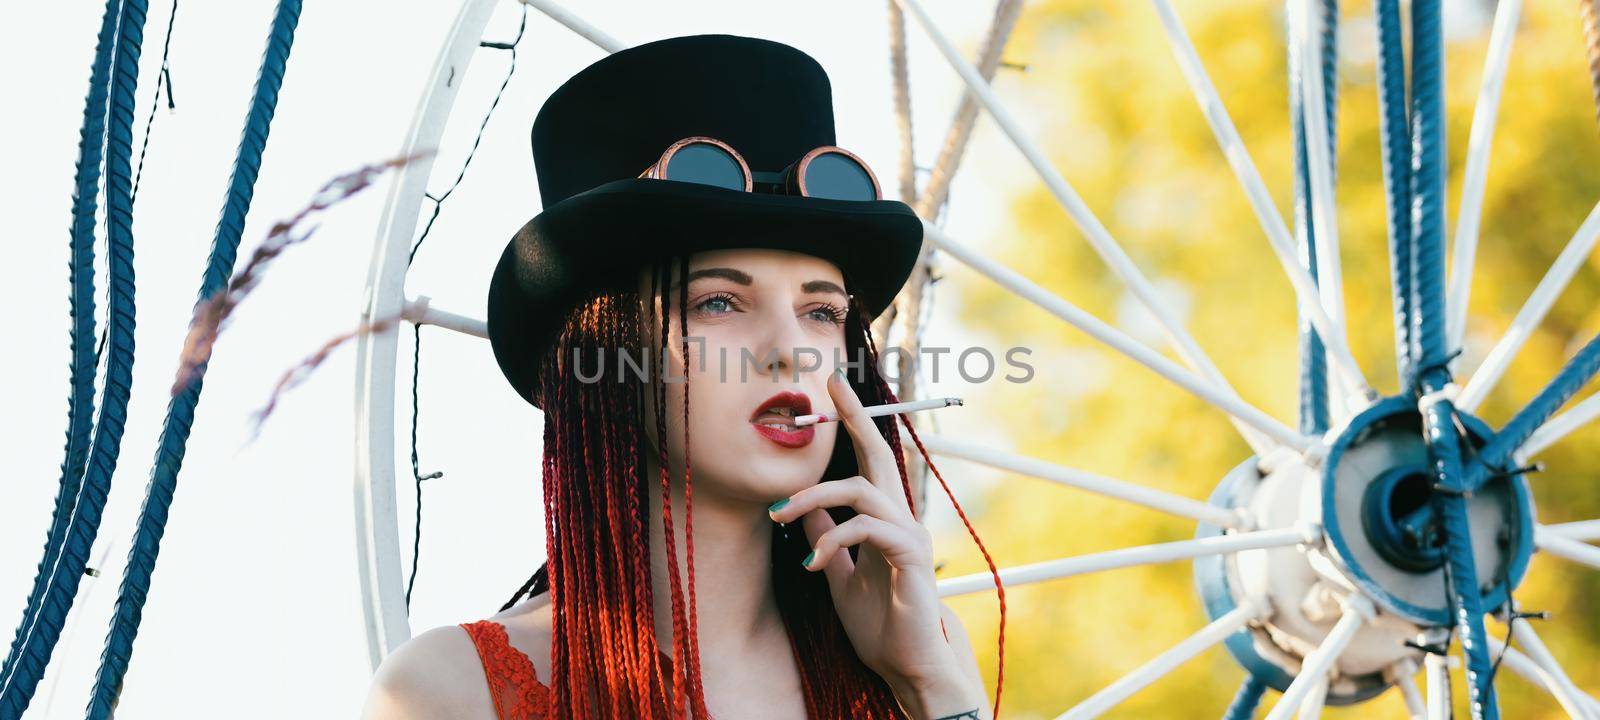 Glamorous girl with scarlet dreadlocks, red swimsuit, black hat and welding glasses posing outdoor with a cigarette 